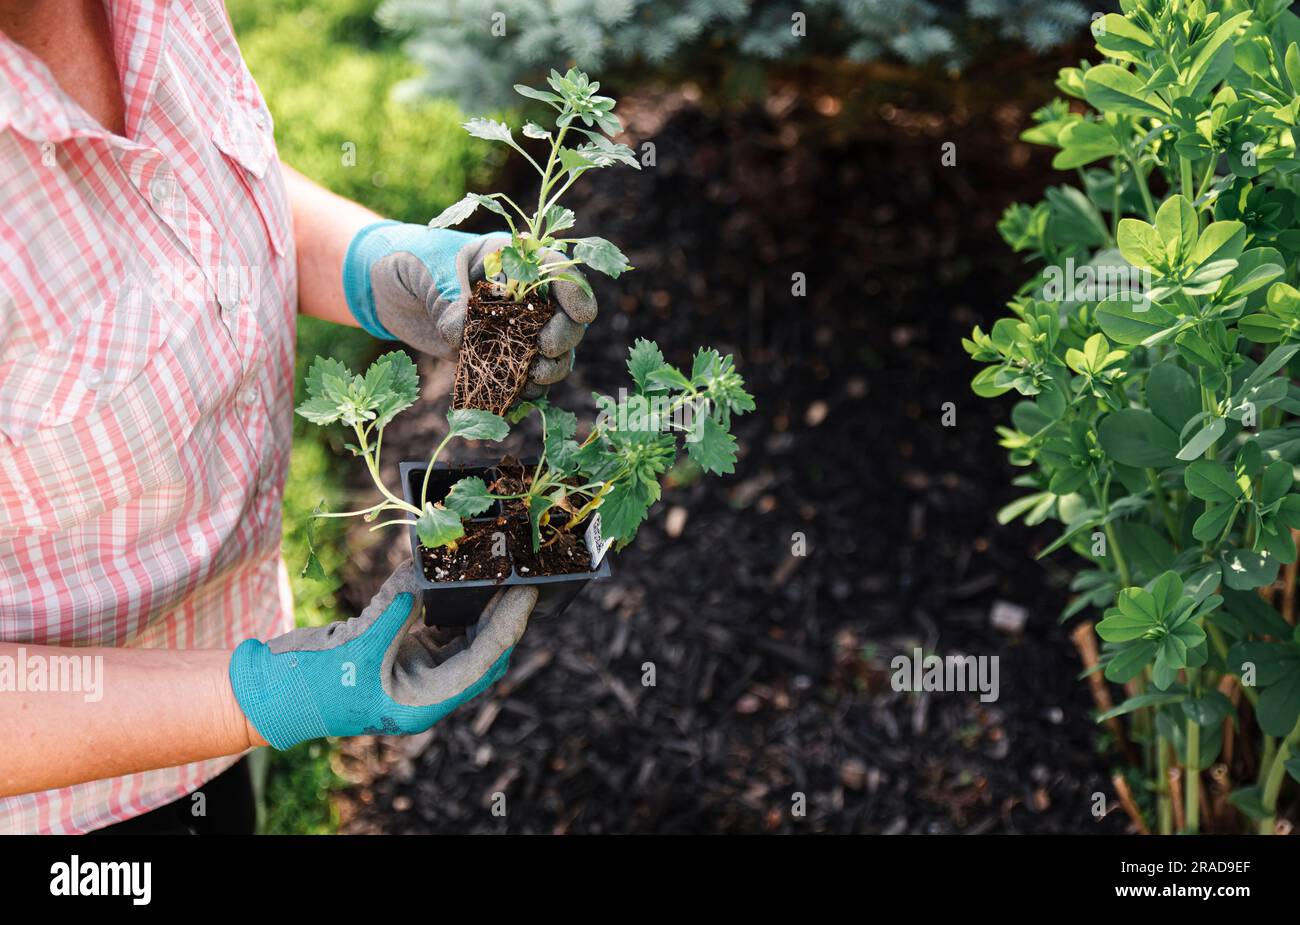 Cropped image of older woman taking flower out of pot to plant. Stock Photo